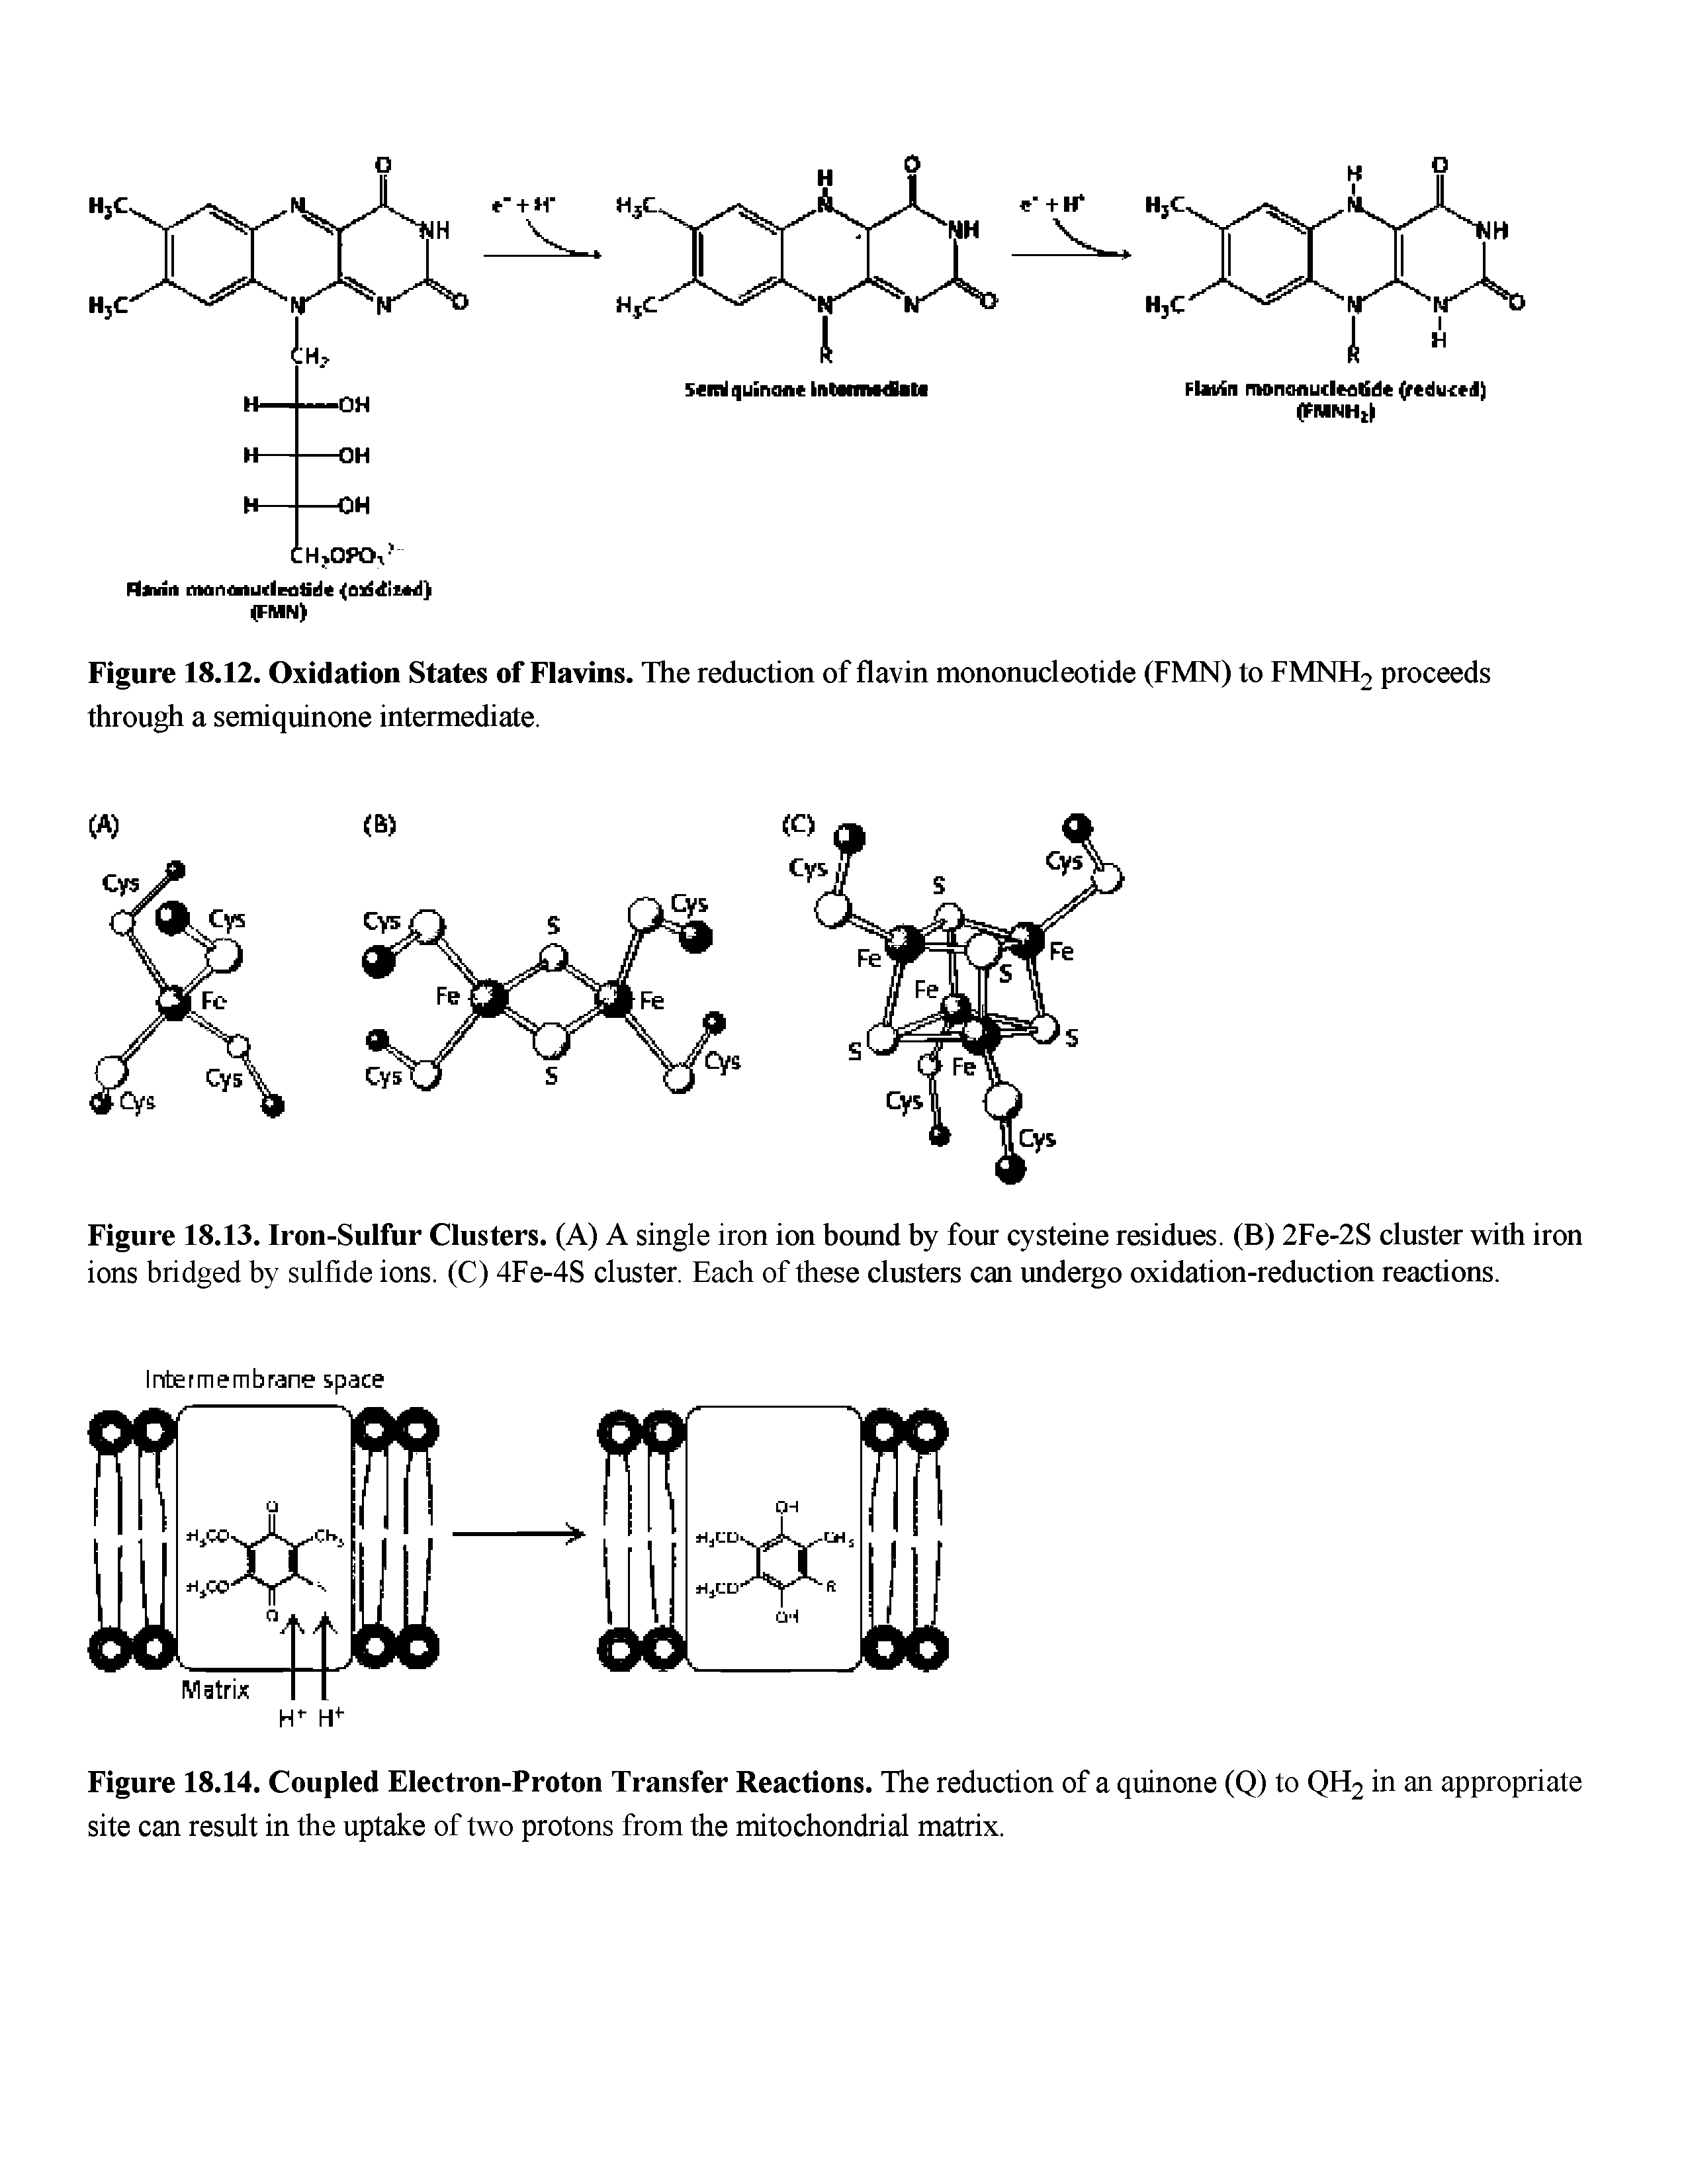 Figure 18.12. Oxidation States of Flavins. The reduction of flavin mononucleotide (FMN) to FMNH2 proceeds through a semiquinone intermediate.